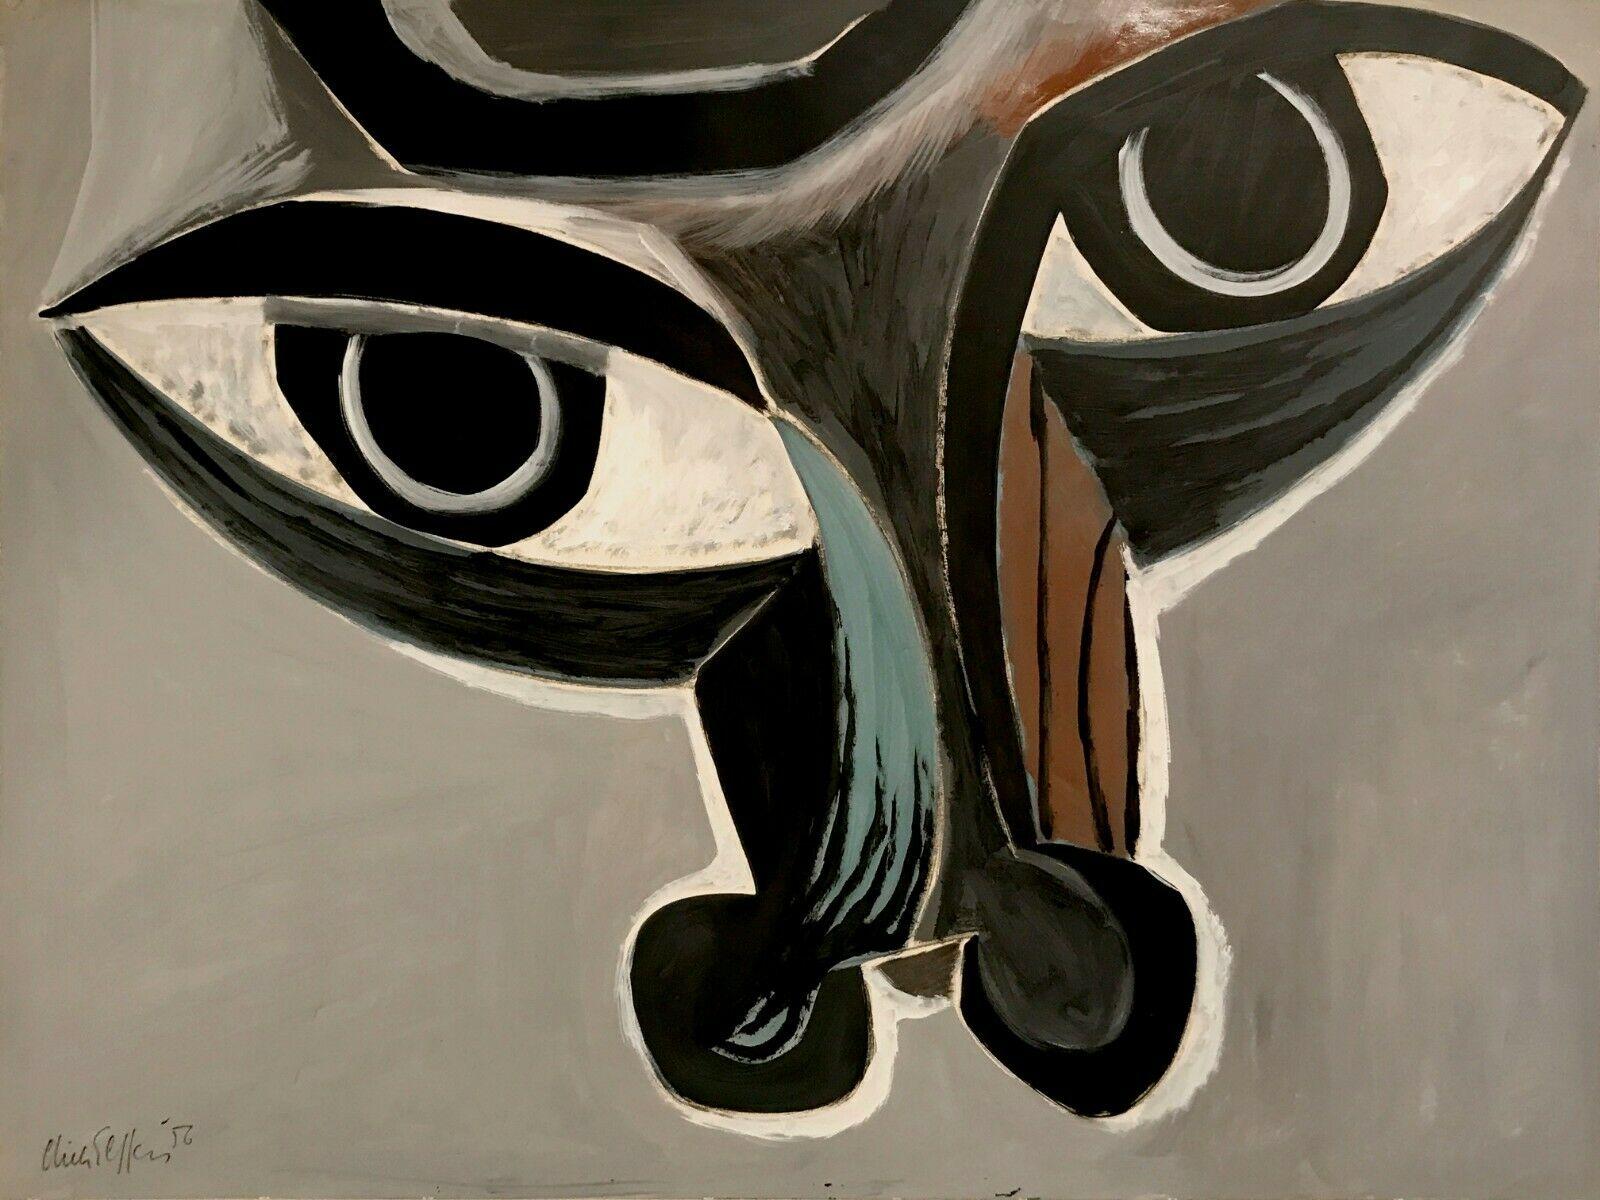 A large and powerful figurative painting representing a bull by Dick Effers (1910-1991), dated 1956, Netherlands. This gouache on mounted paper on canvas is a portrait of a bull reminding tauromachies by Picasso. Its vigorous lines and sophisticated